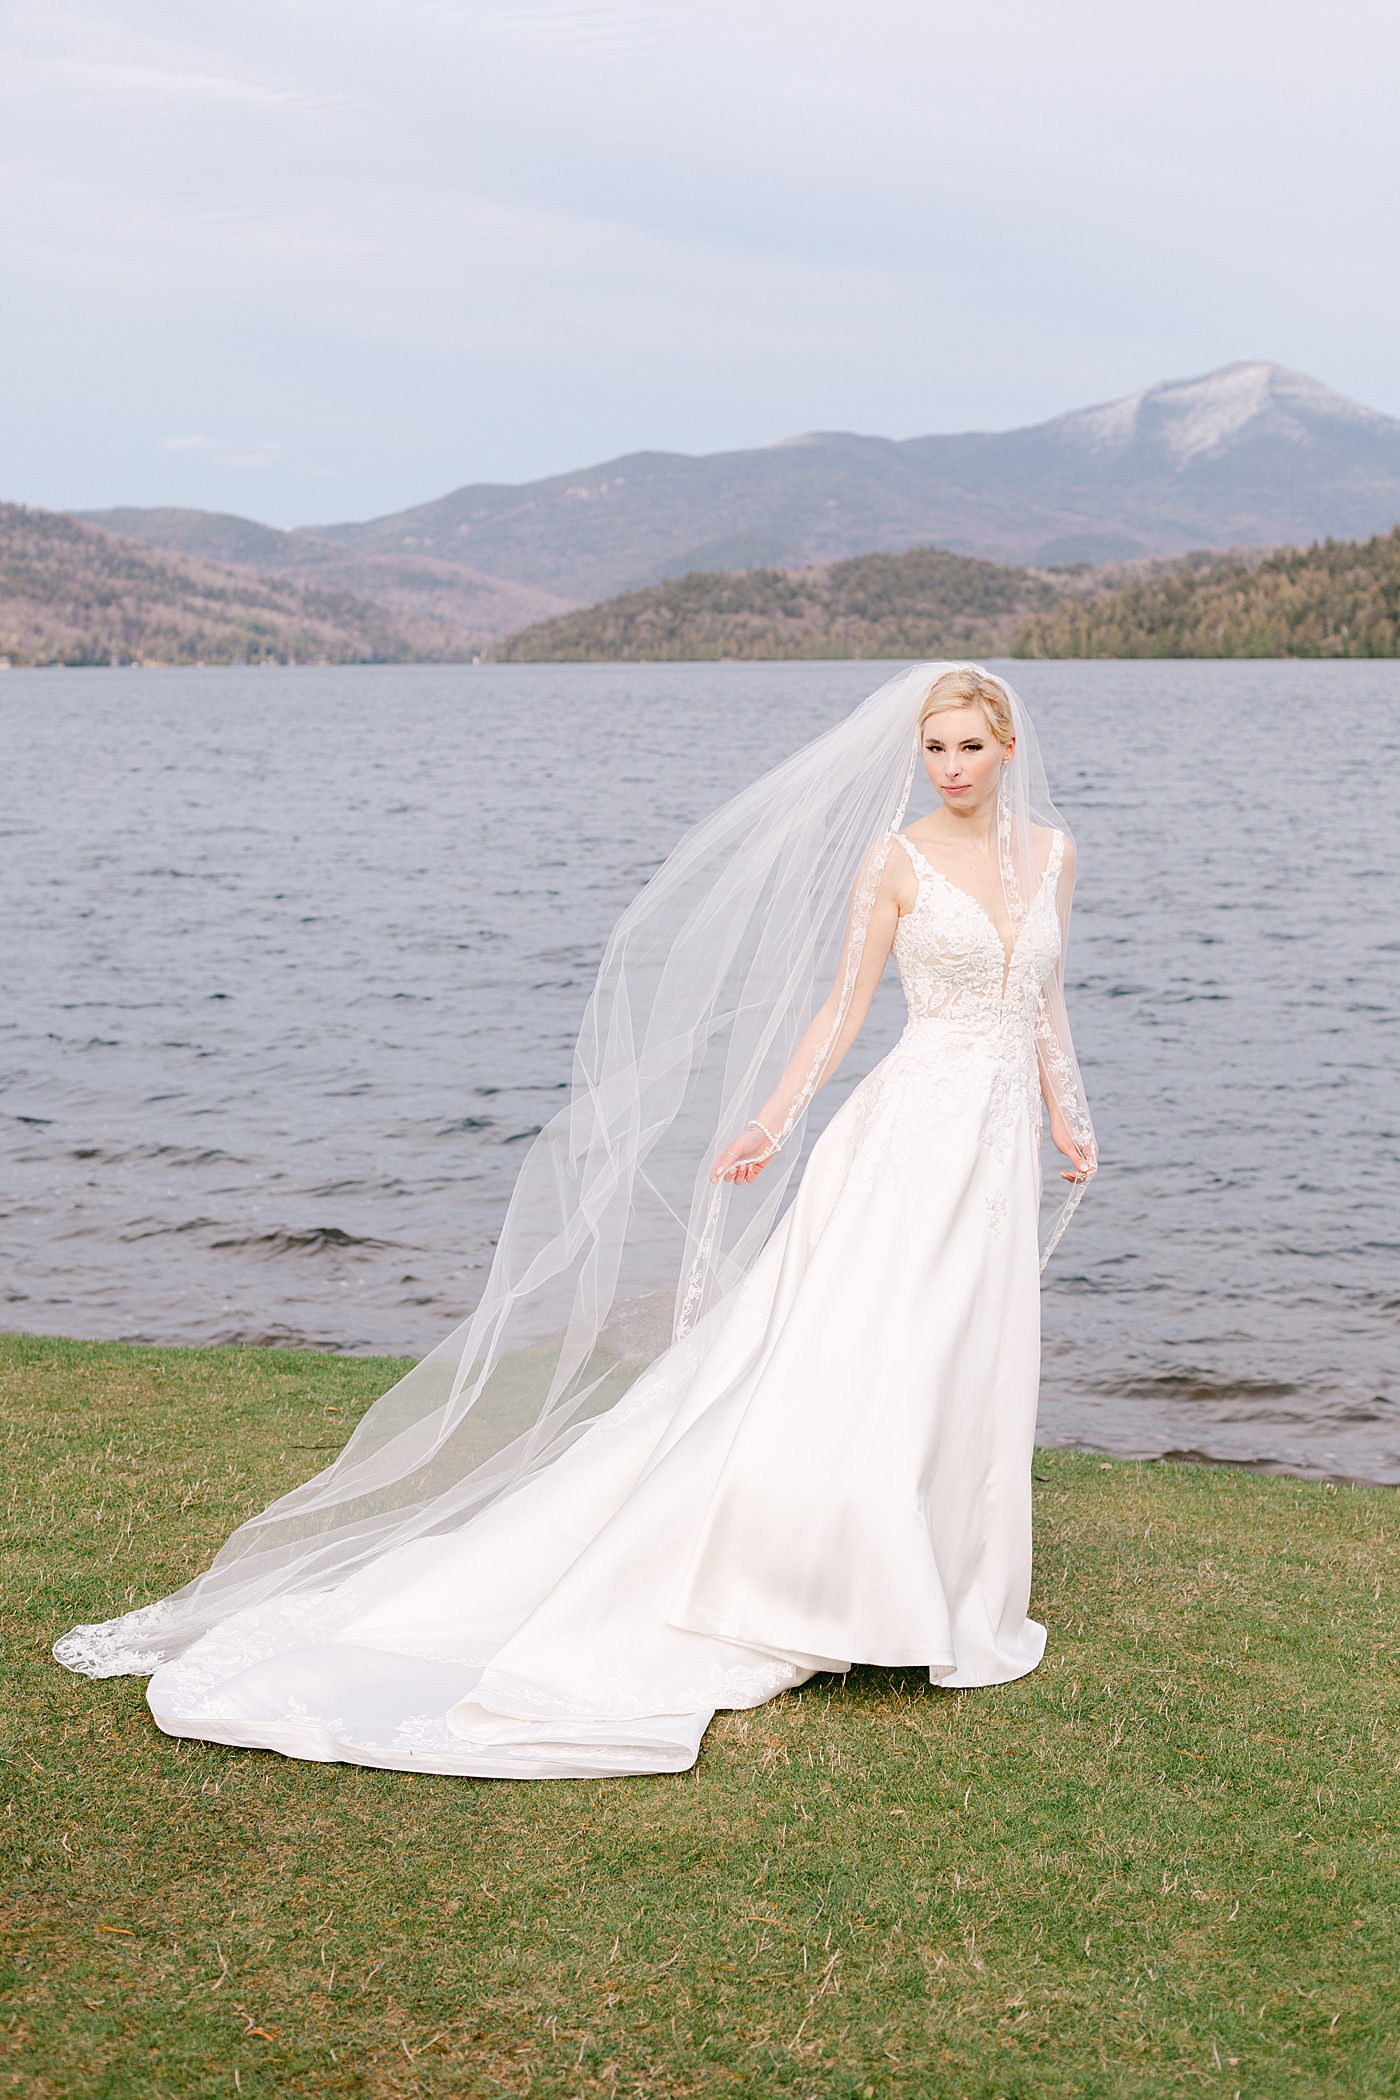 Bridal portrait near the lake | Image by Hope Helmuth Photography